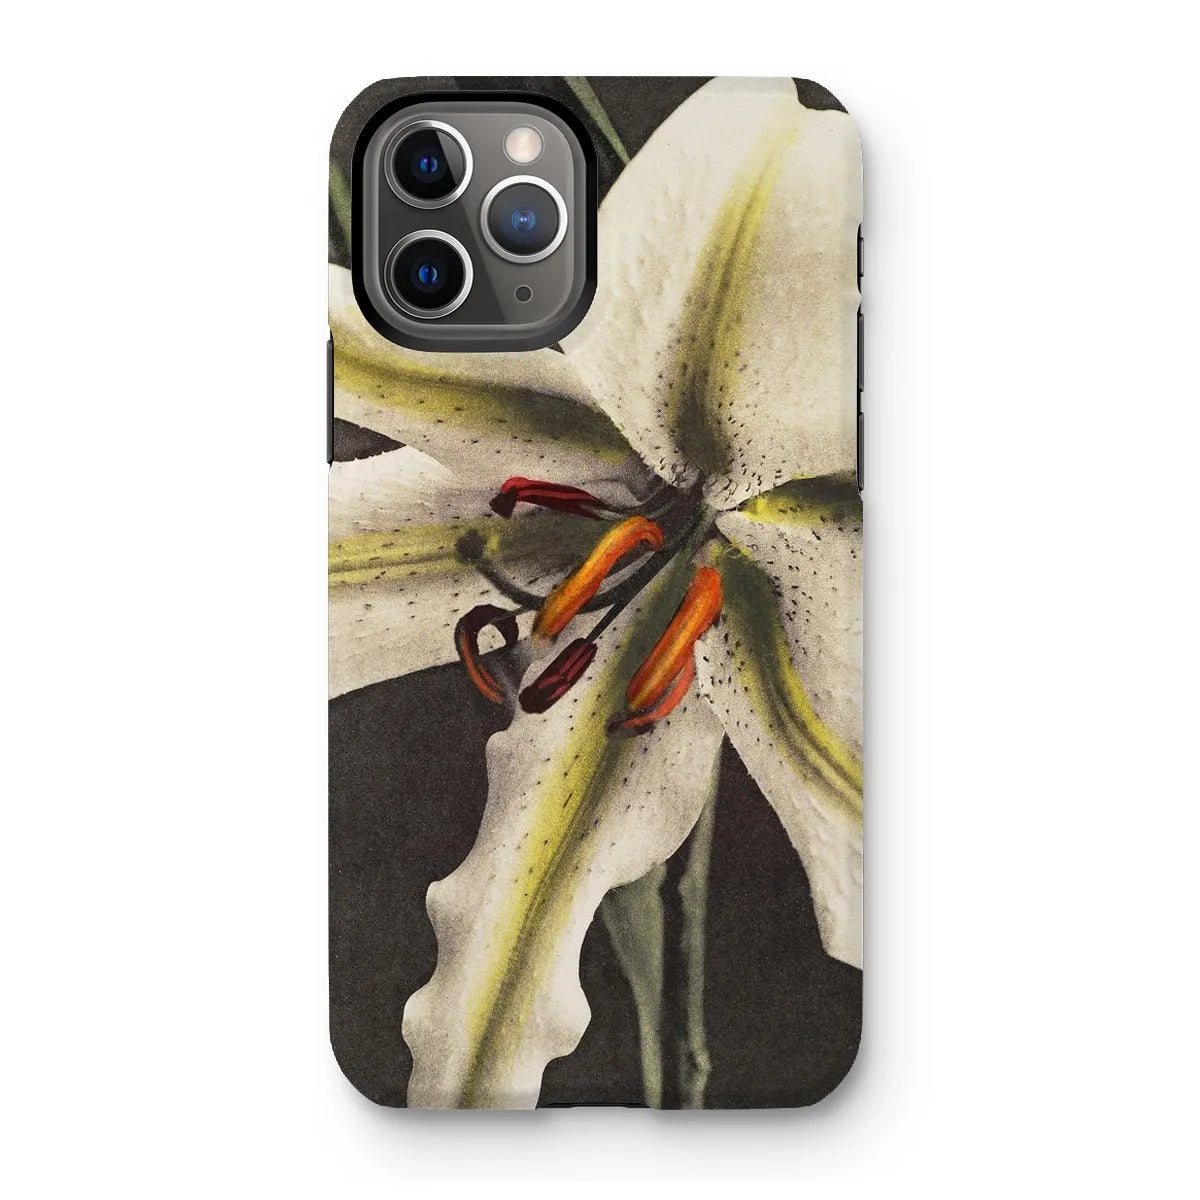 Lily By Kazumasa Ogawa Art Phone Case - Iphone 11 Pro Max / Matte - Mobile Phone Cases - Aesthetic Art